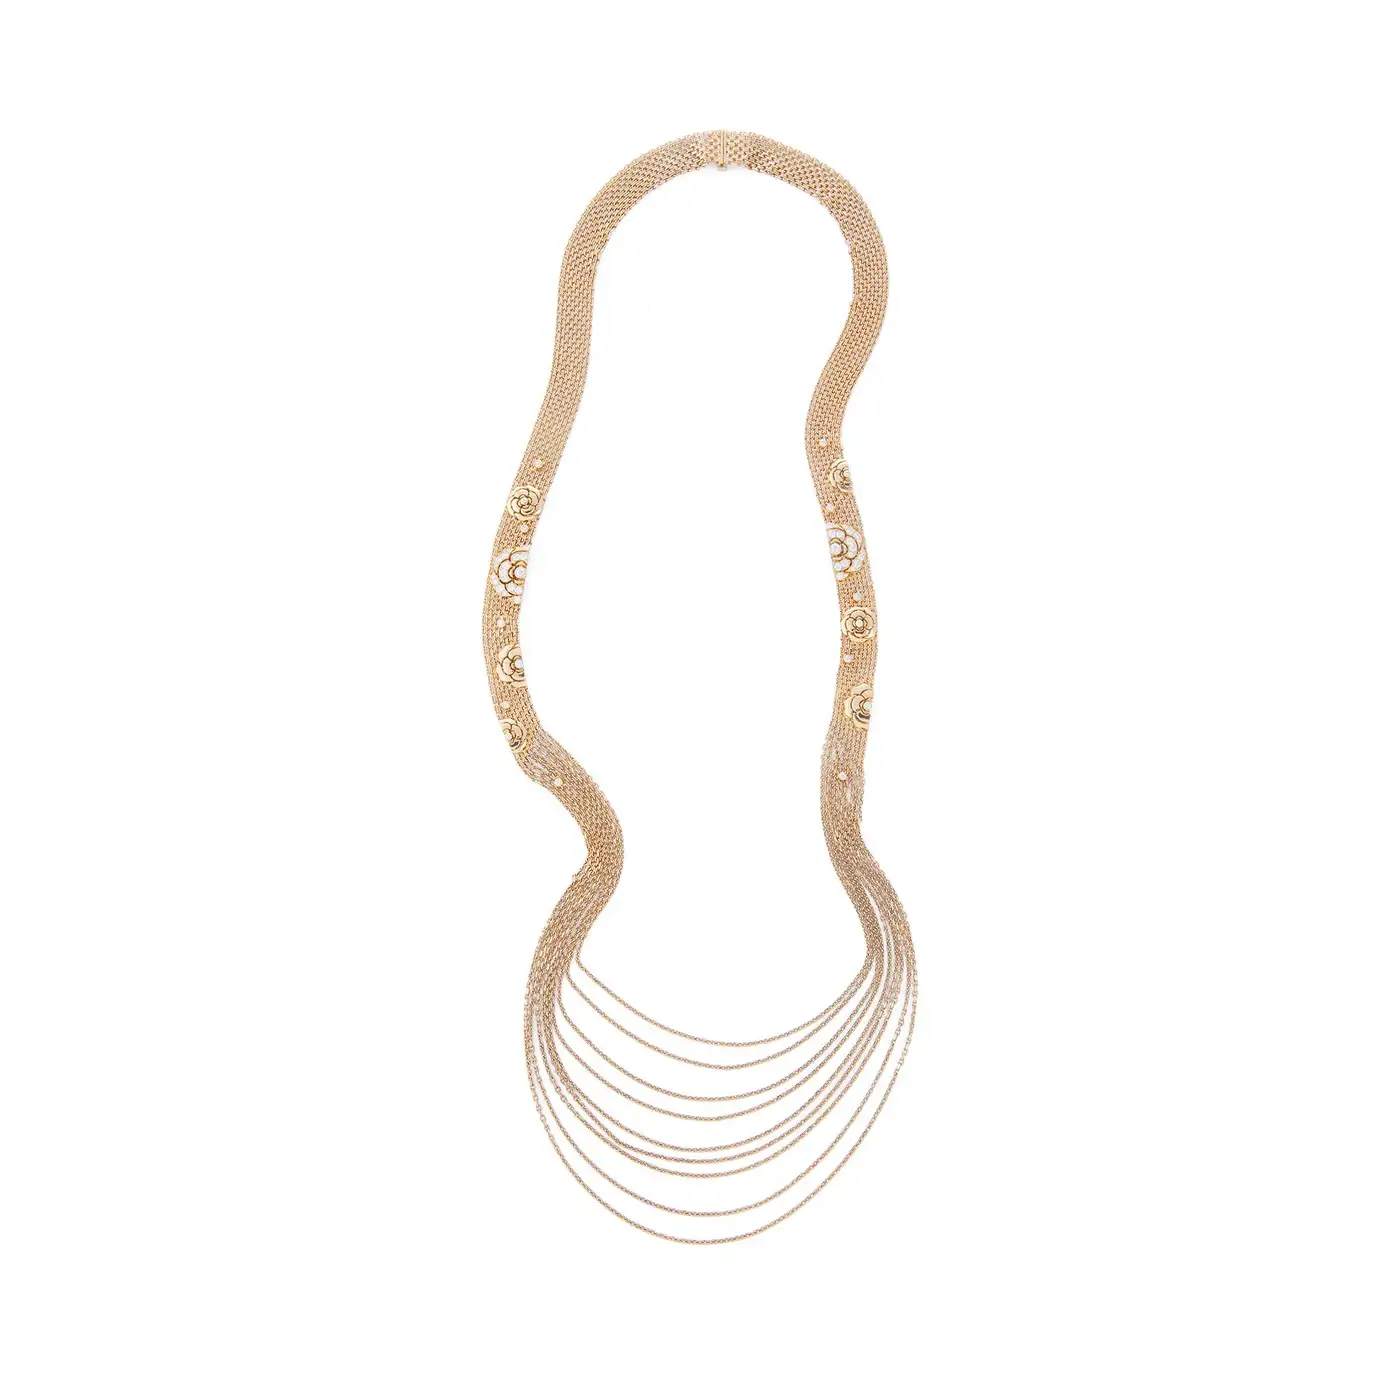 Chanel-Gold-and-Diamond-Camellia-Multi-Strand-Flapper-Necklace-2.webp